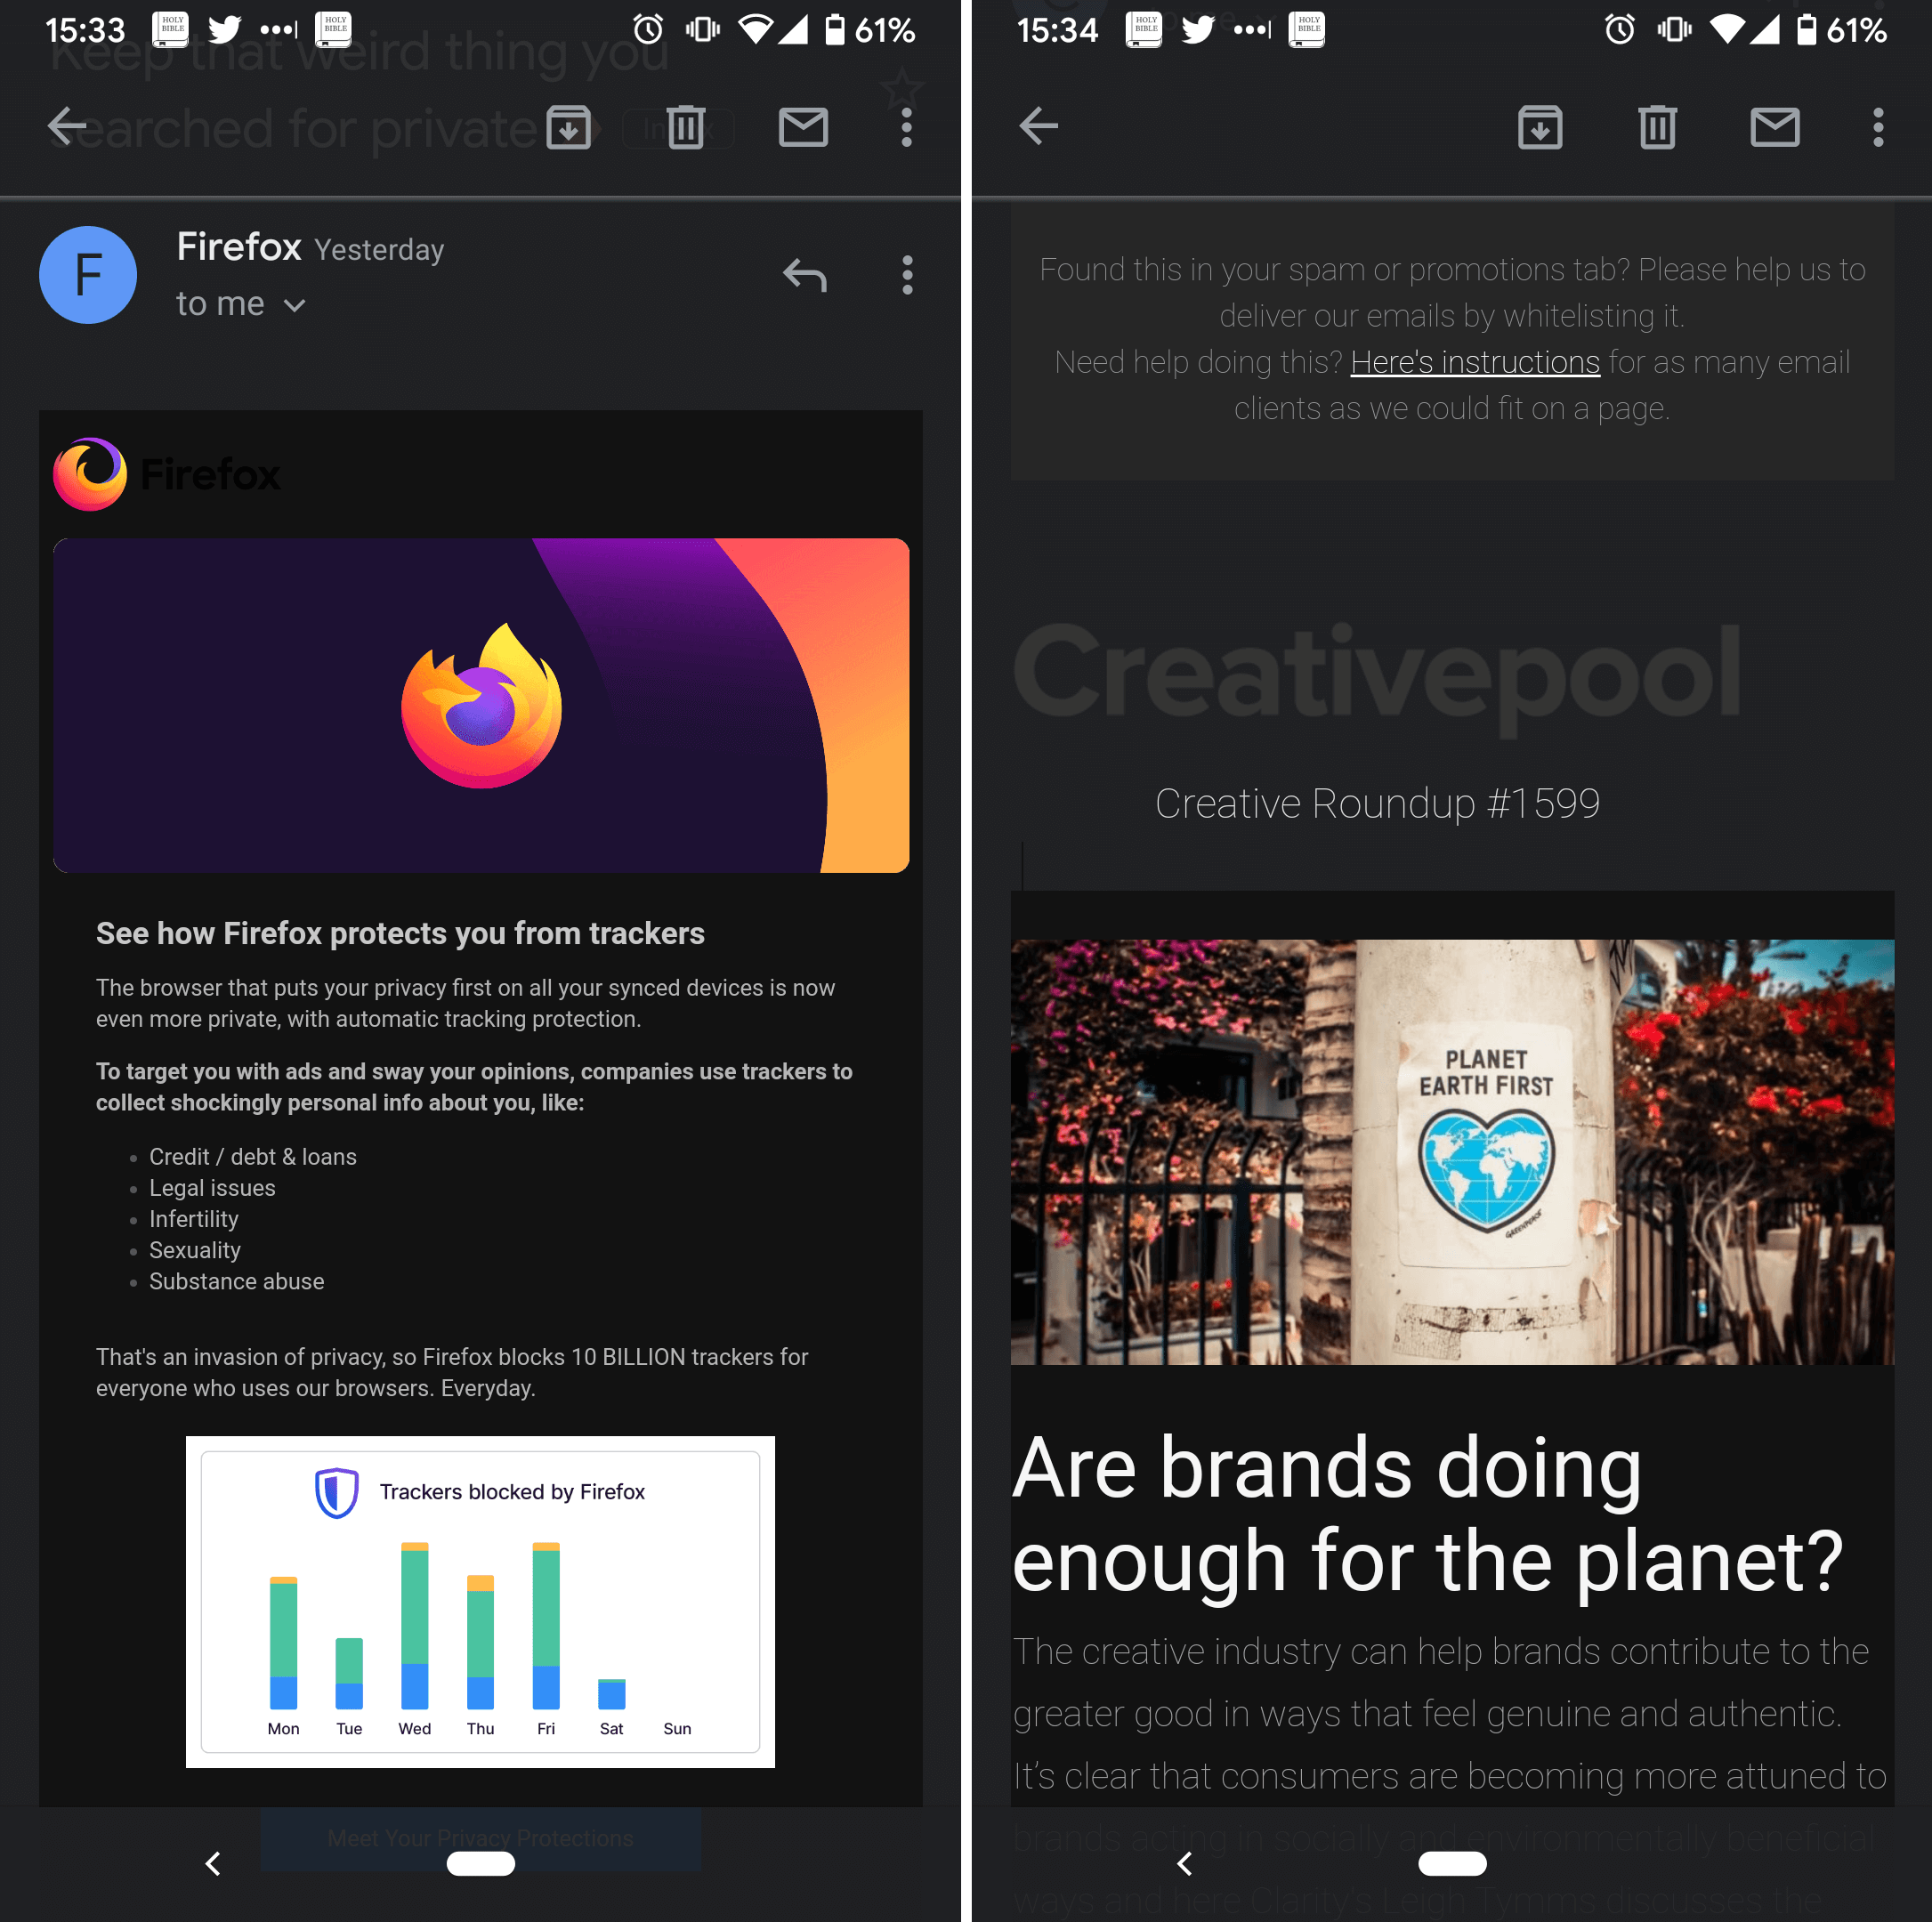 If dark mode is not set up properly, there can be accessibility issues where text on images becomes hard to read on Gmail and some other apps